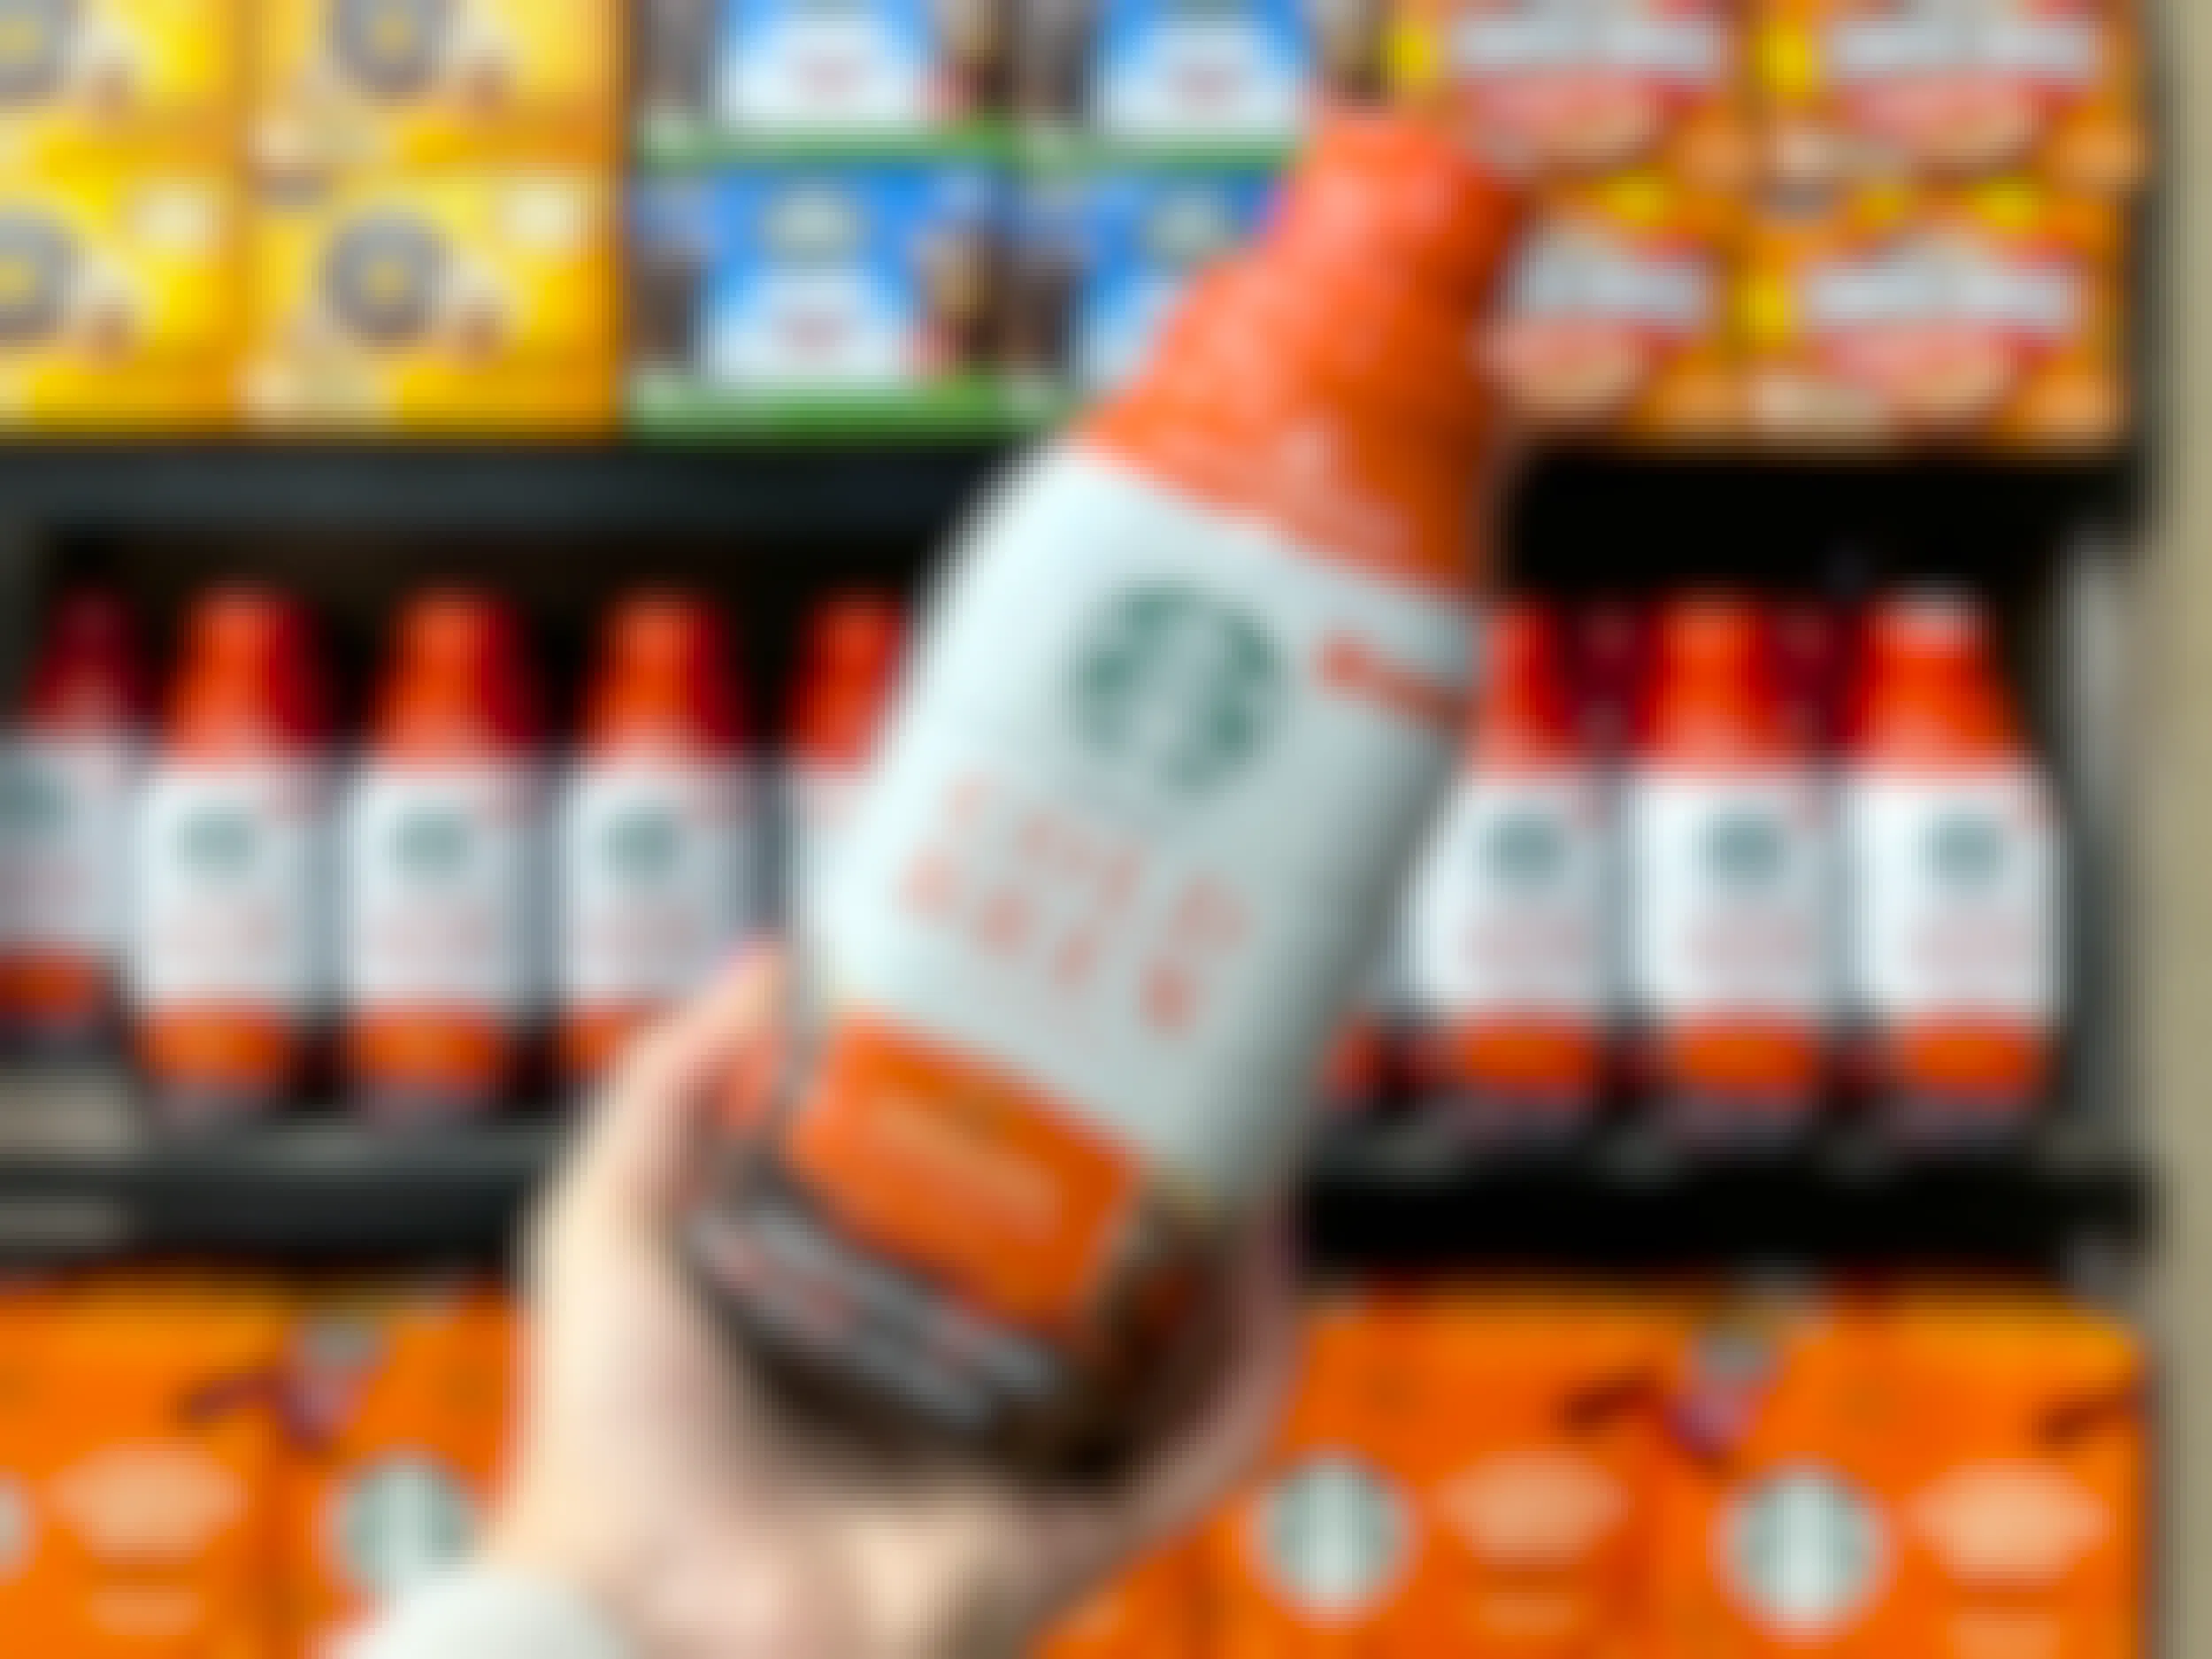 hand holding bottle of starbucks pumpkin spice cold brew near other fall products in jewel osco